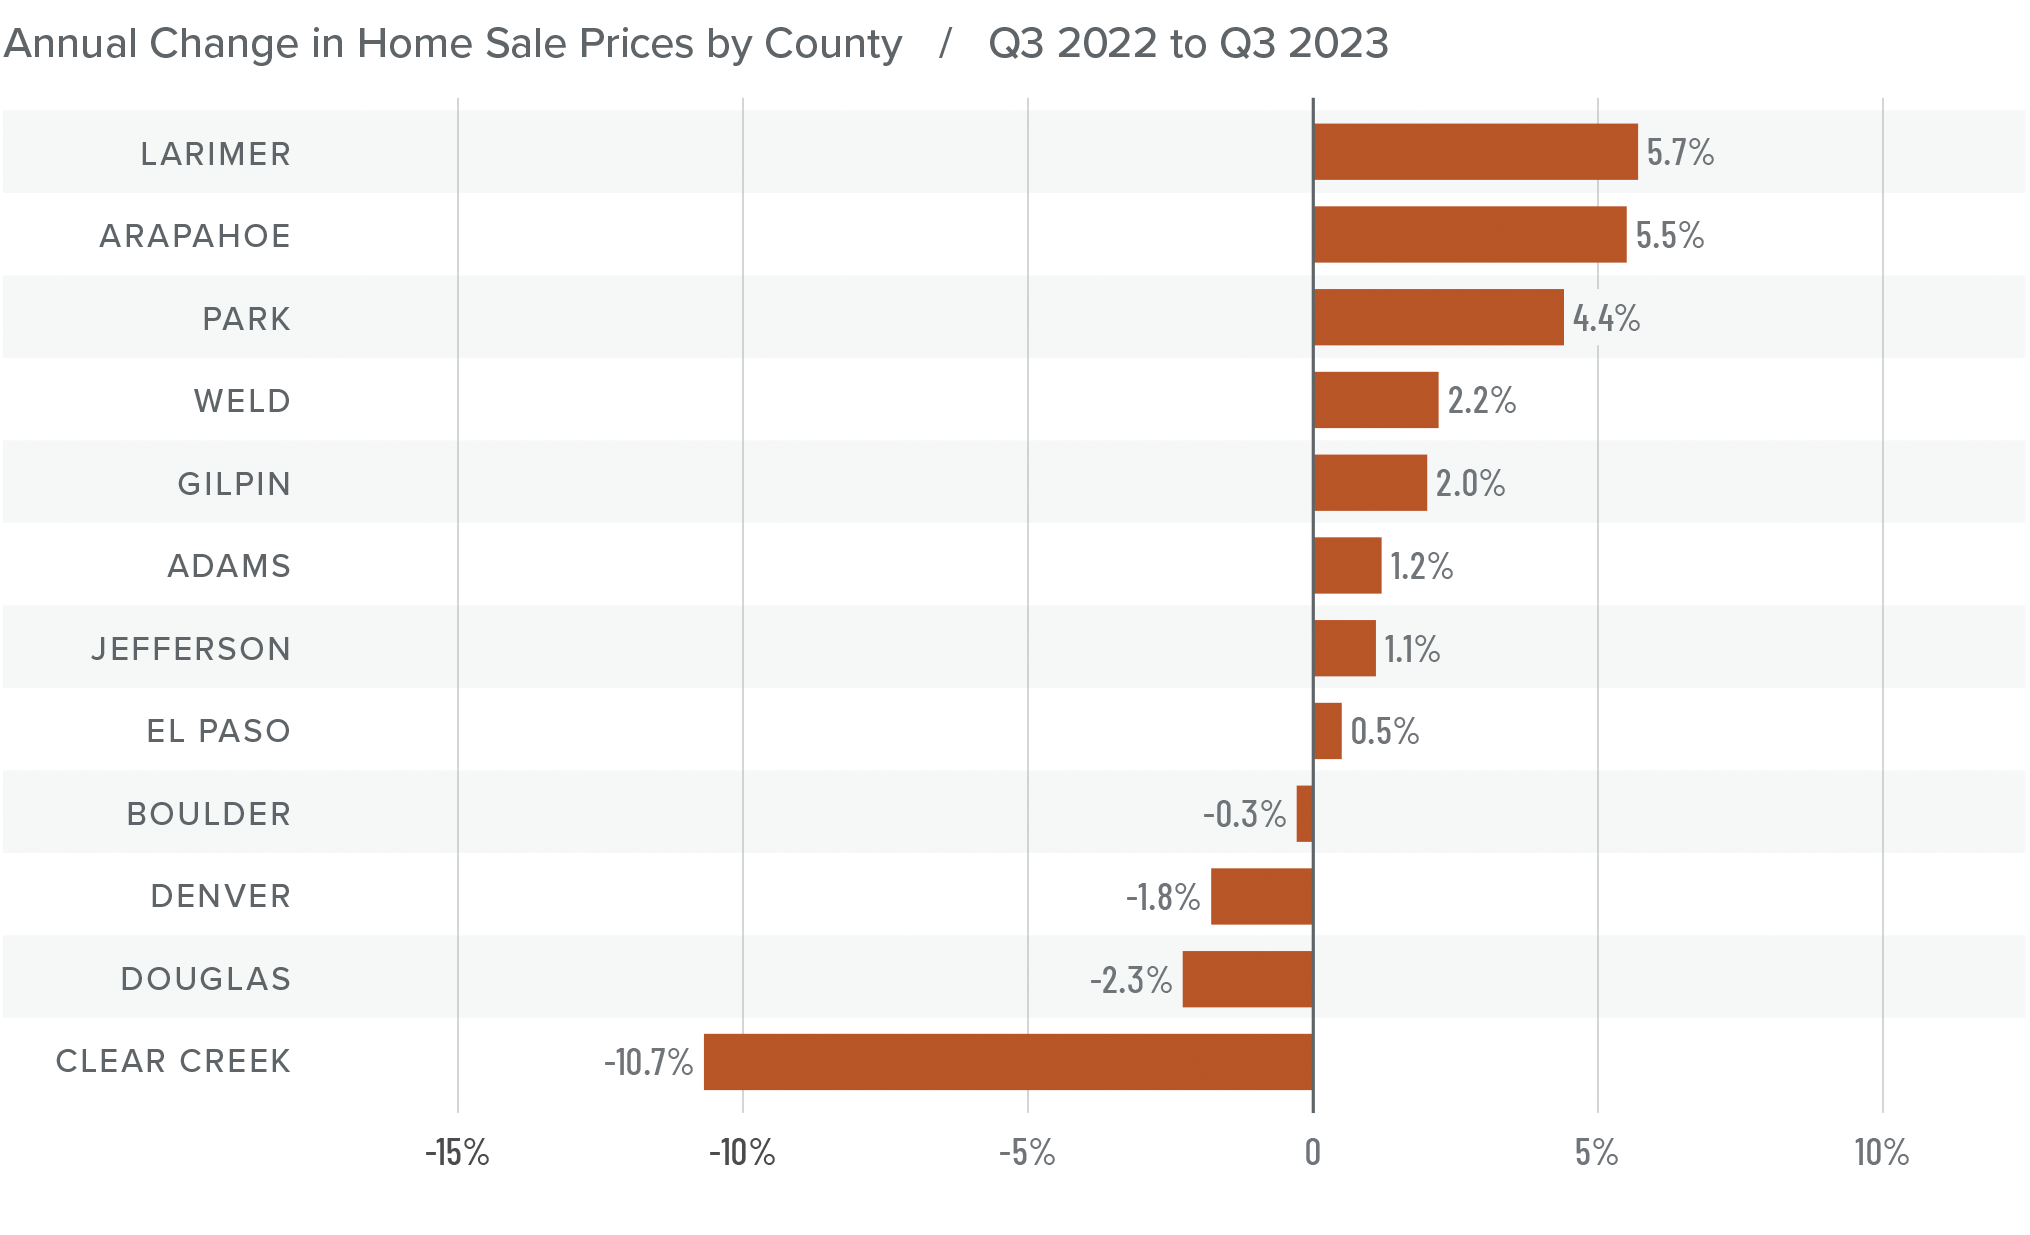 A bar graph showing the annual change in home sale prices by county in Colorado from Q3 2022 to Q3 2023. Boulder had the lowest change at -0.3% and Clear Creek had the biggest decrease at 10.7% while Larimer and Arapahoe had the greatest increases at 5.7% and 5.5% respectively.